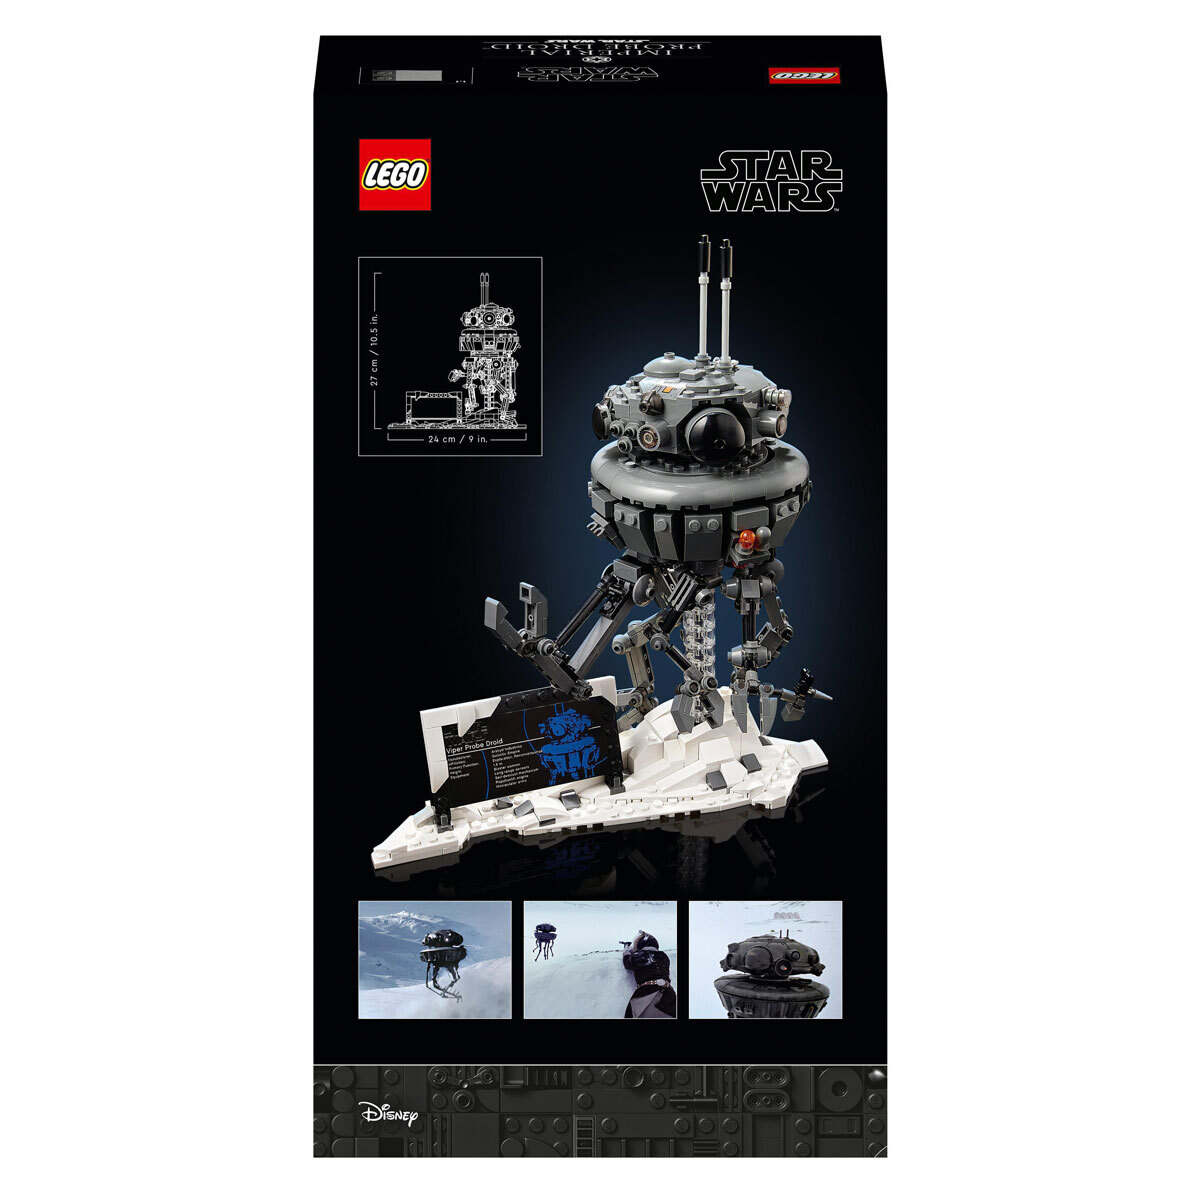 Buy LEGO Imperial Probe Droid Model 75306 Back of Box Image at Costco.co.uk